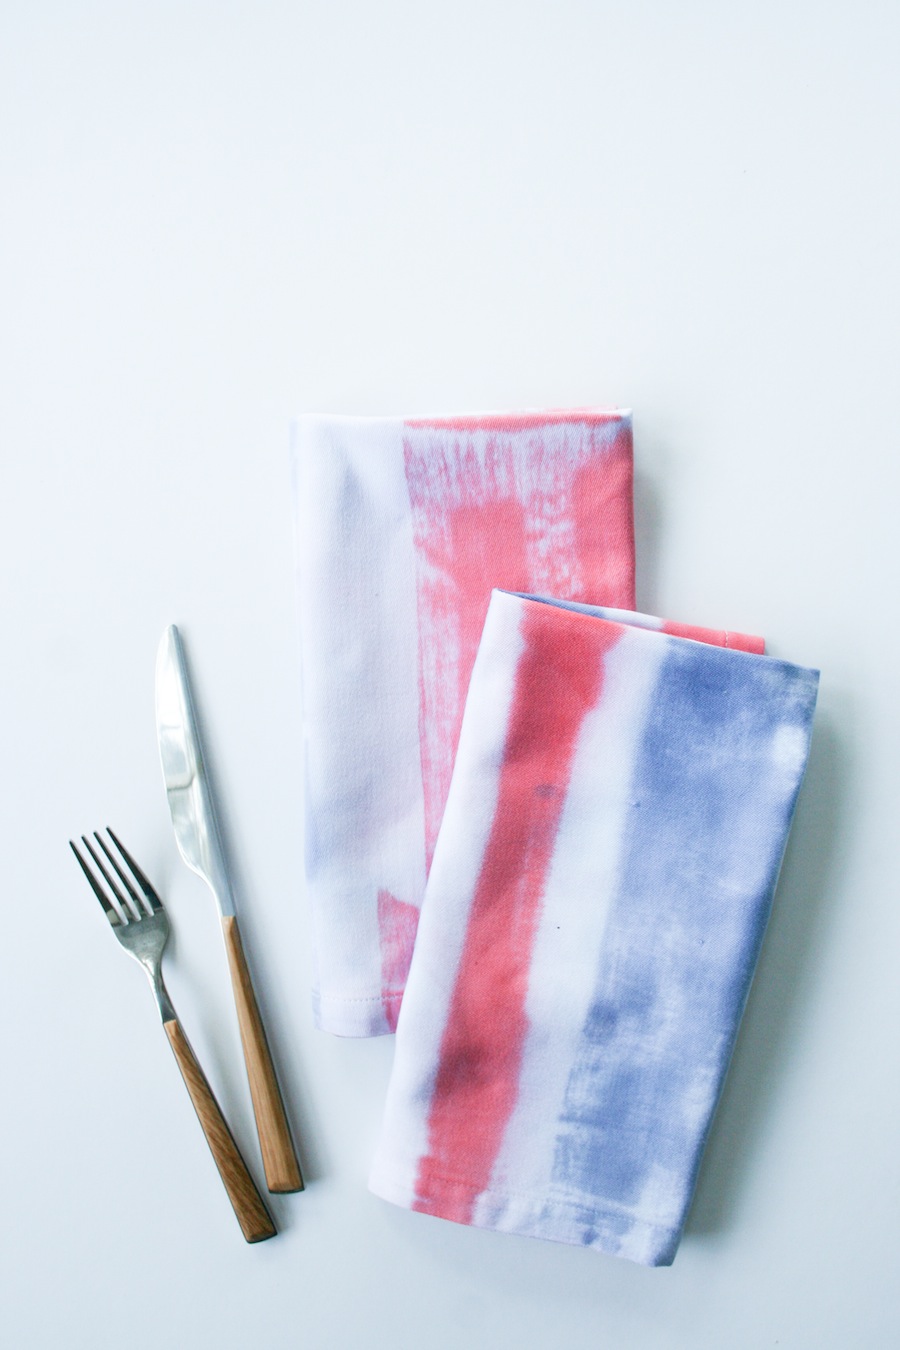 DIY Red White and Blue Dip-Dyed or Painted Napkins // Legal Miss Sunshine